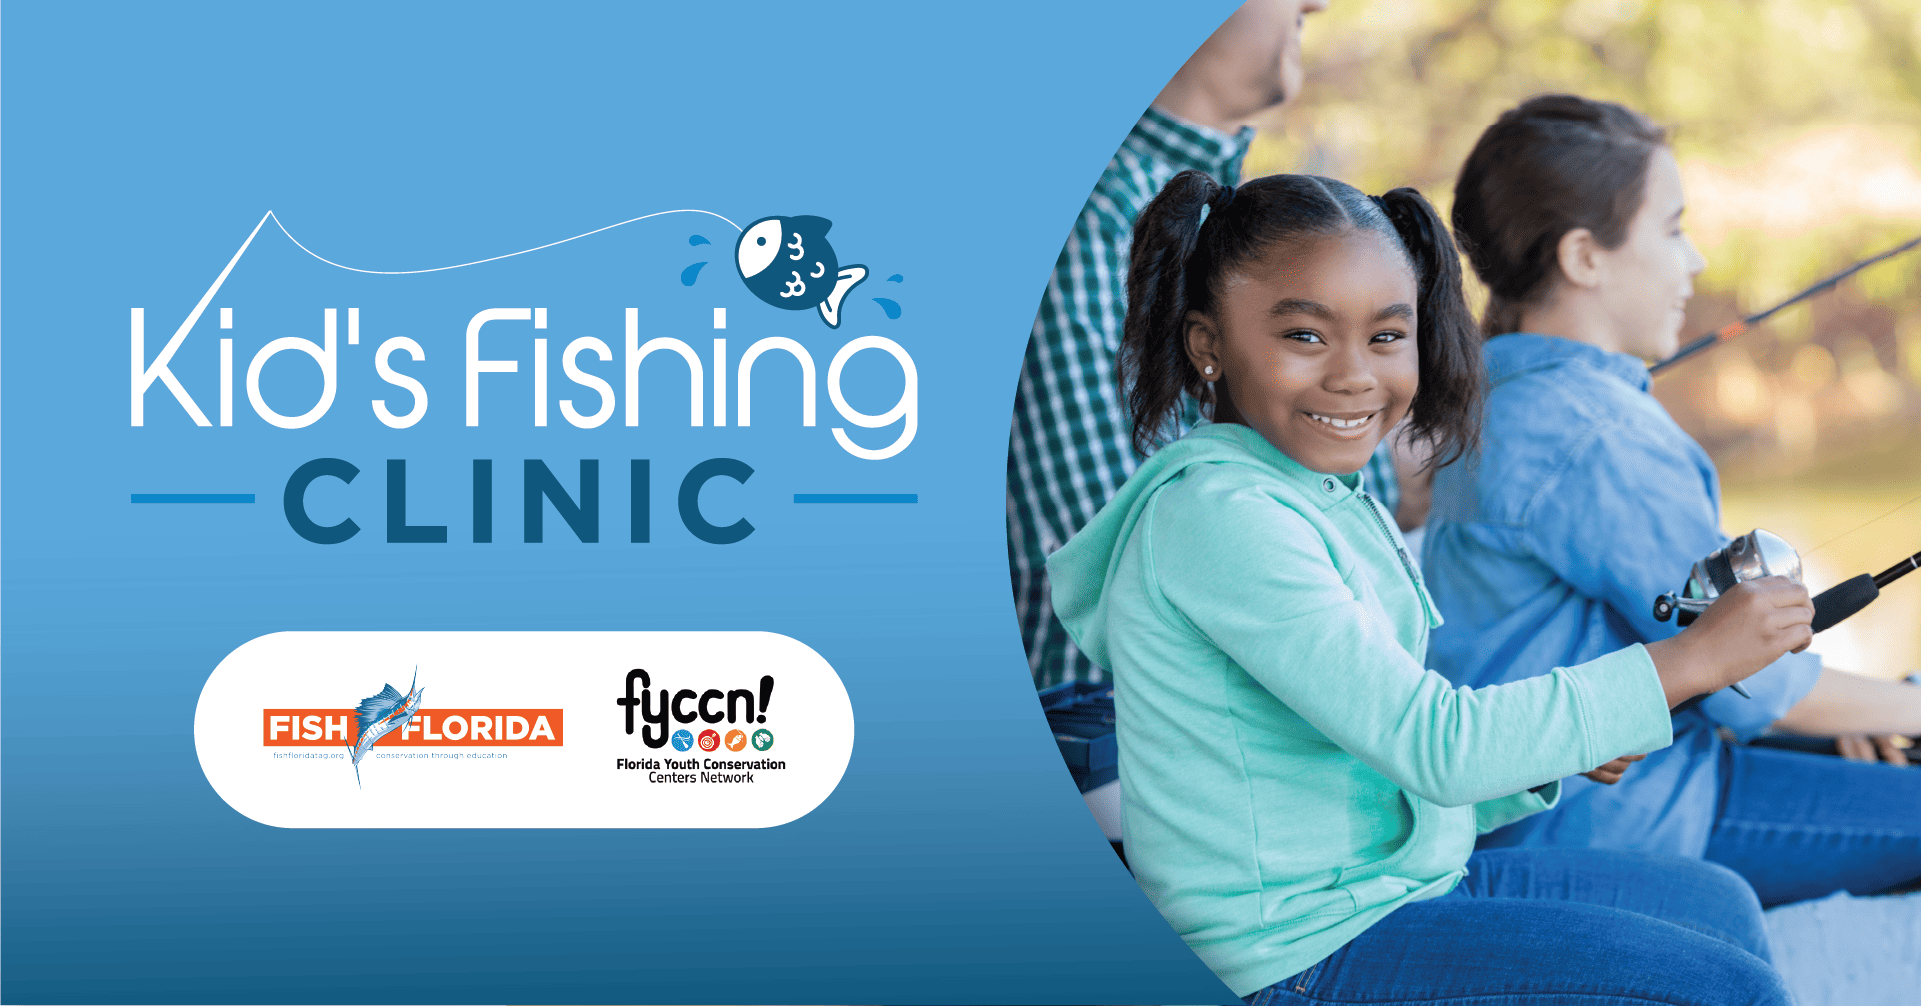 bsp-kids-fishing-clinic-feature